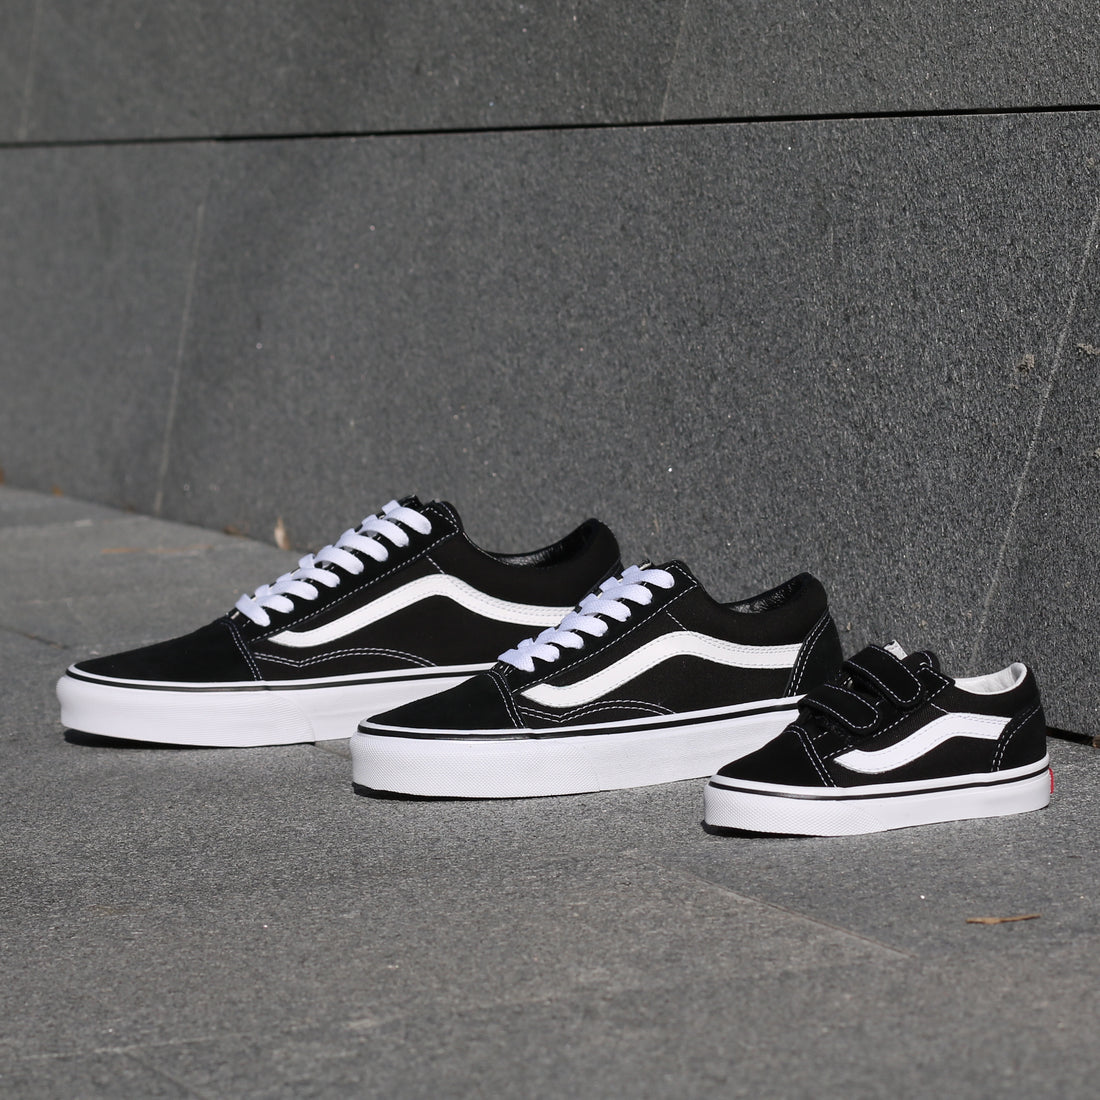 How Old Skool Vans are next in-line for wardrobe essentials.